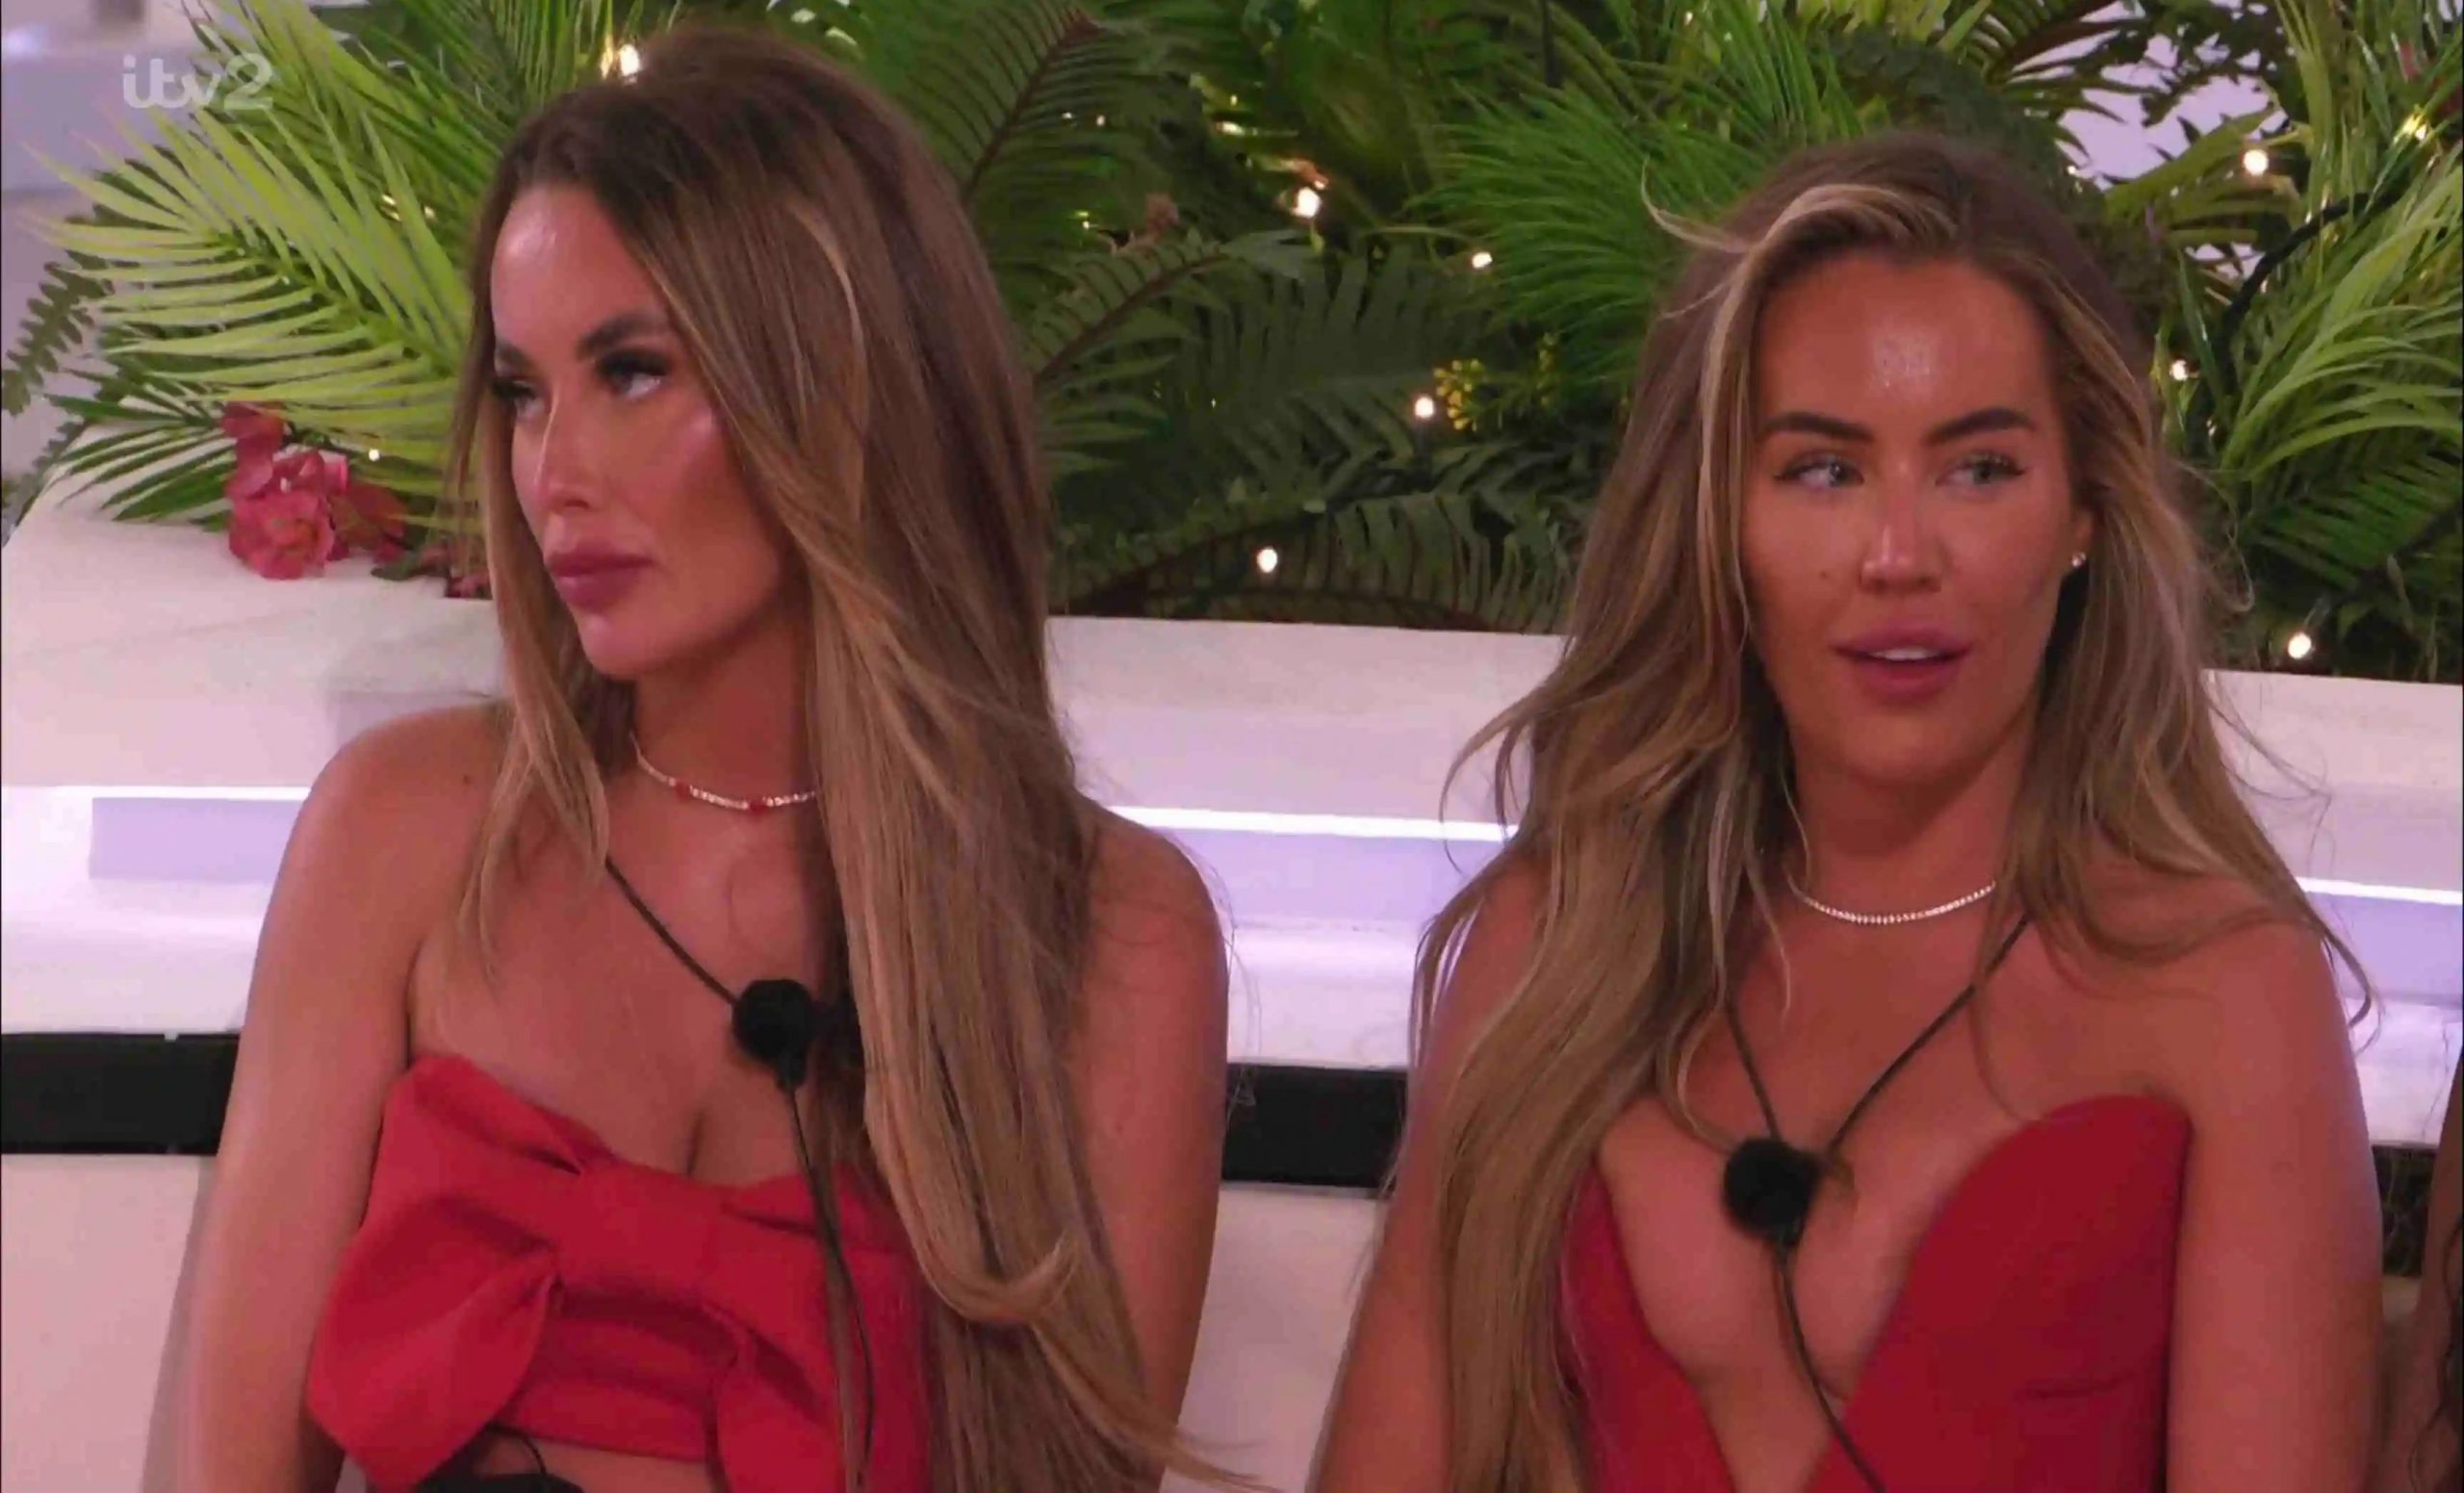 ‘They hate each other’ say Love Island fans as they work out ‘real reason’ for bitter feud in villa